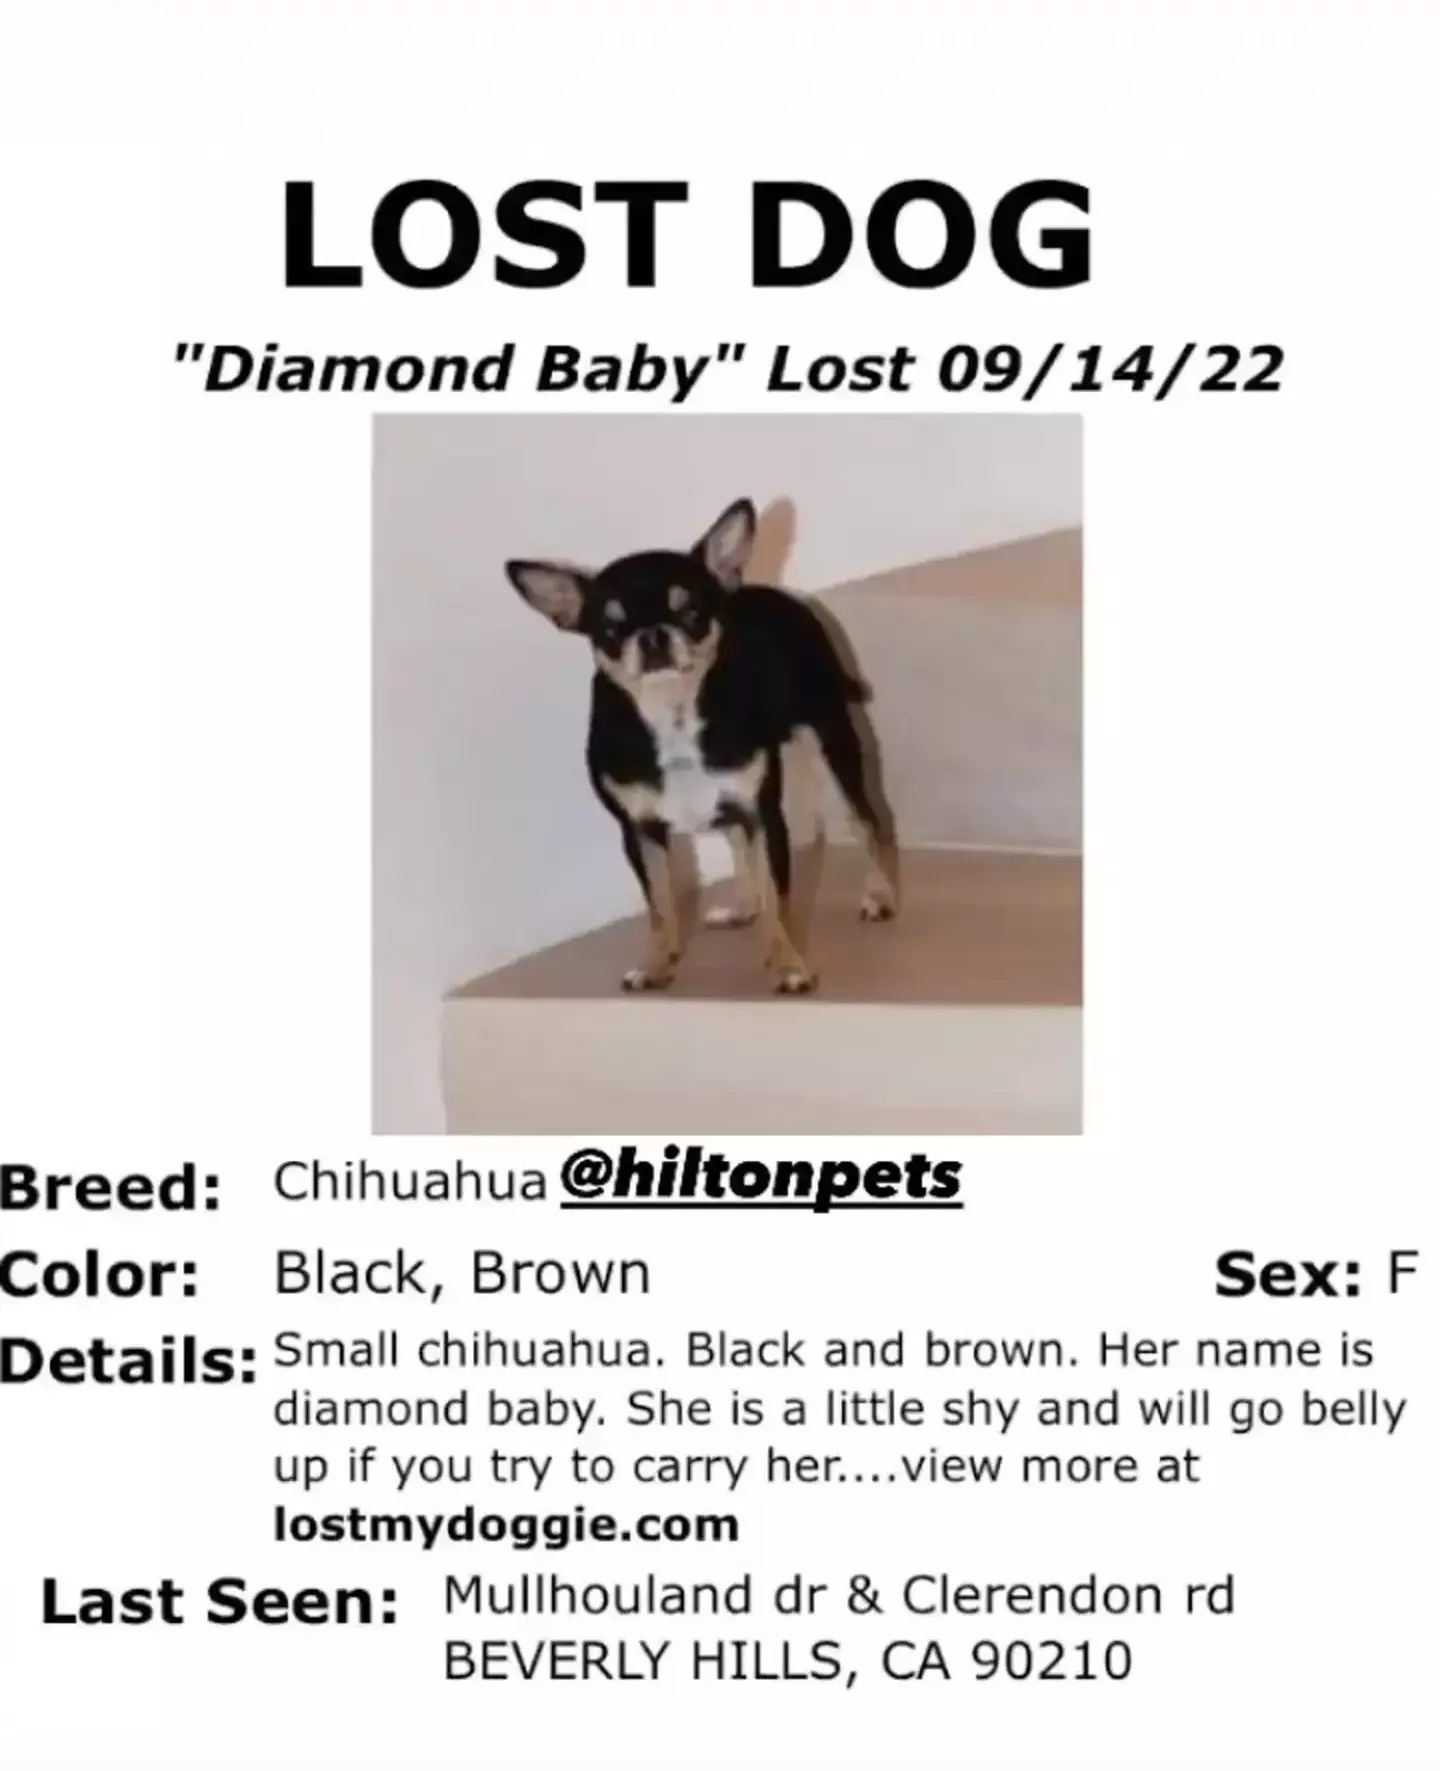 She gave plenty of details about Diamond Baby in the initial missing dog poster.